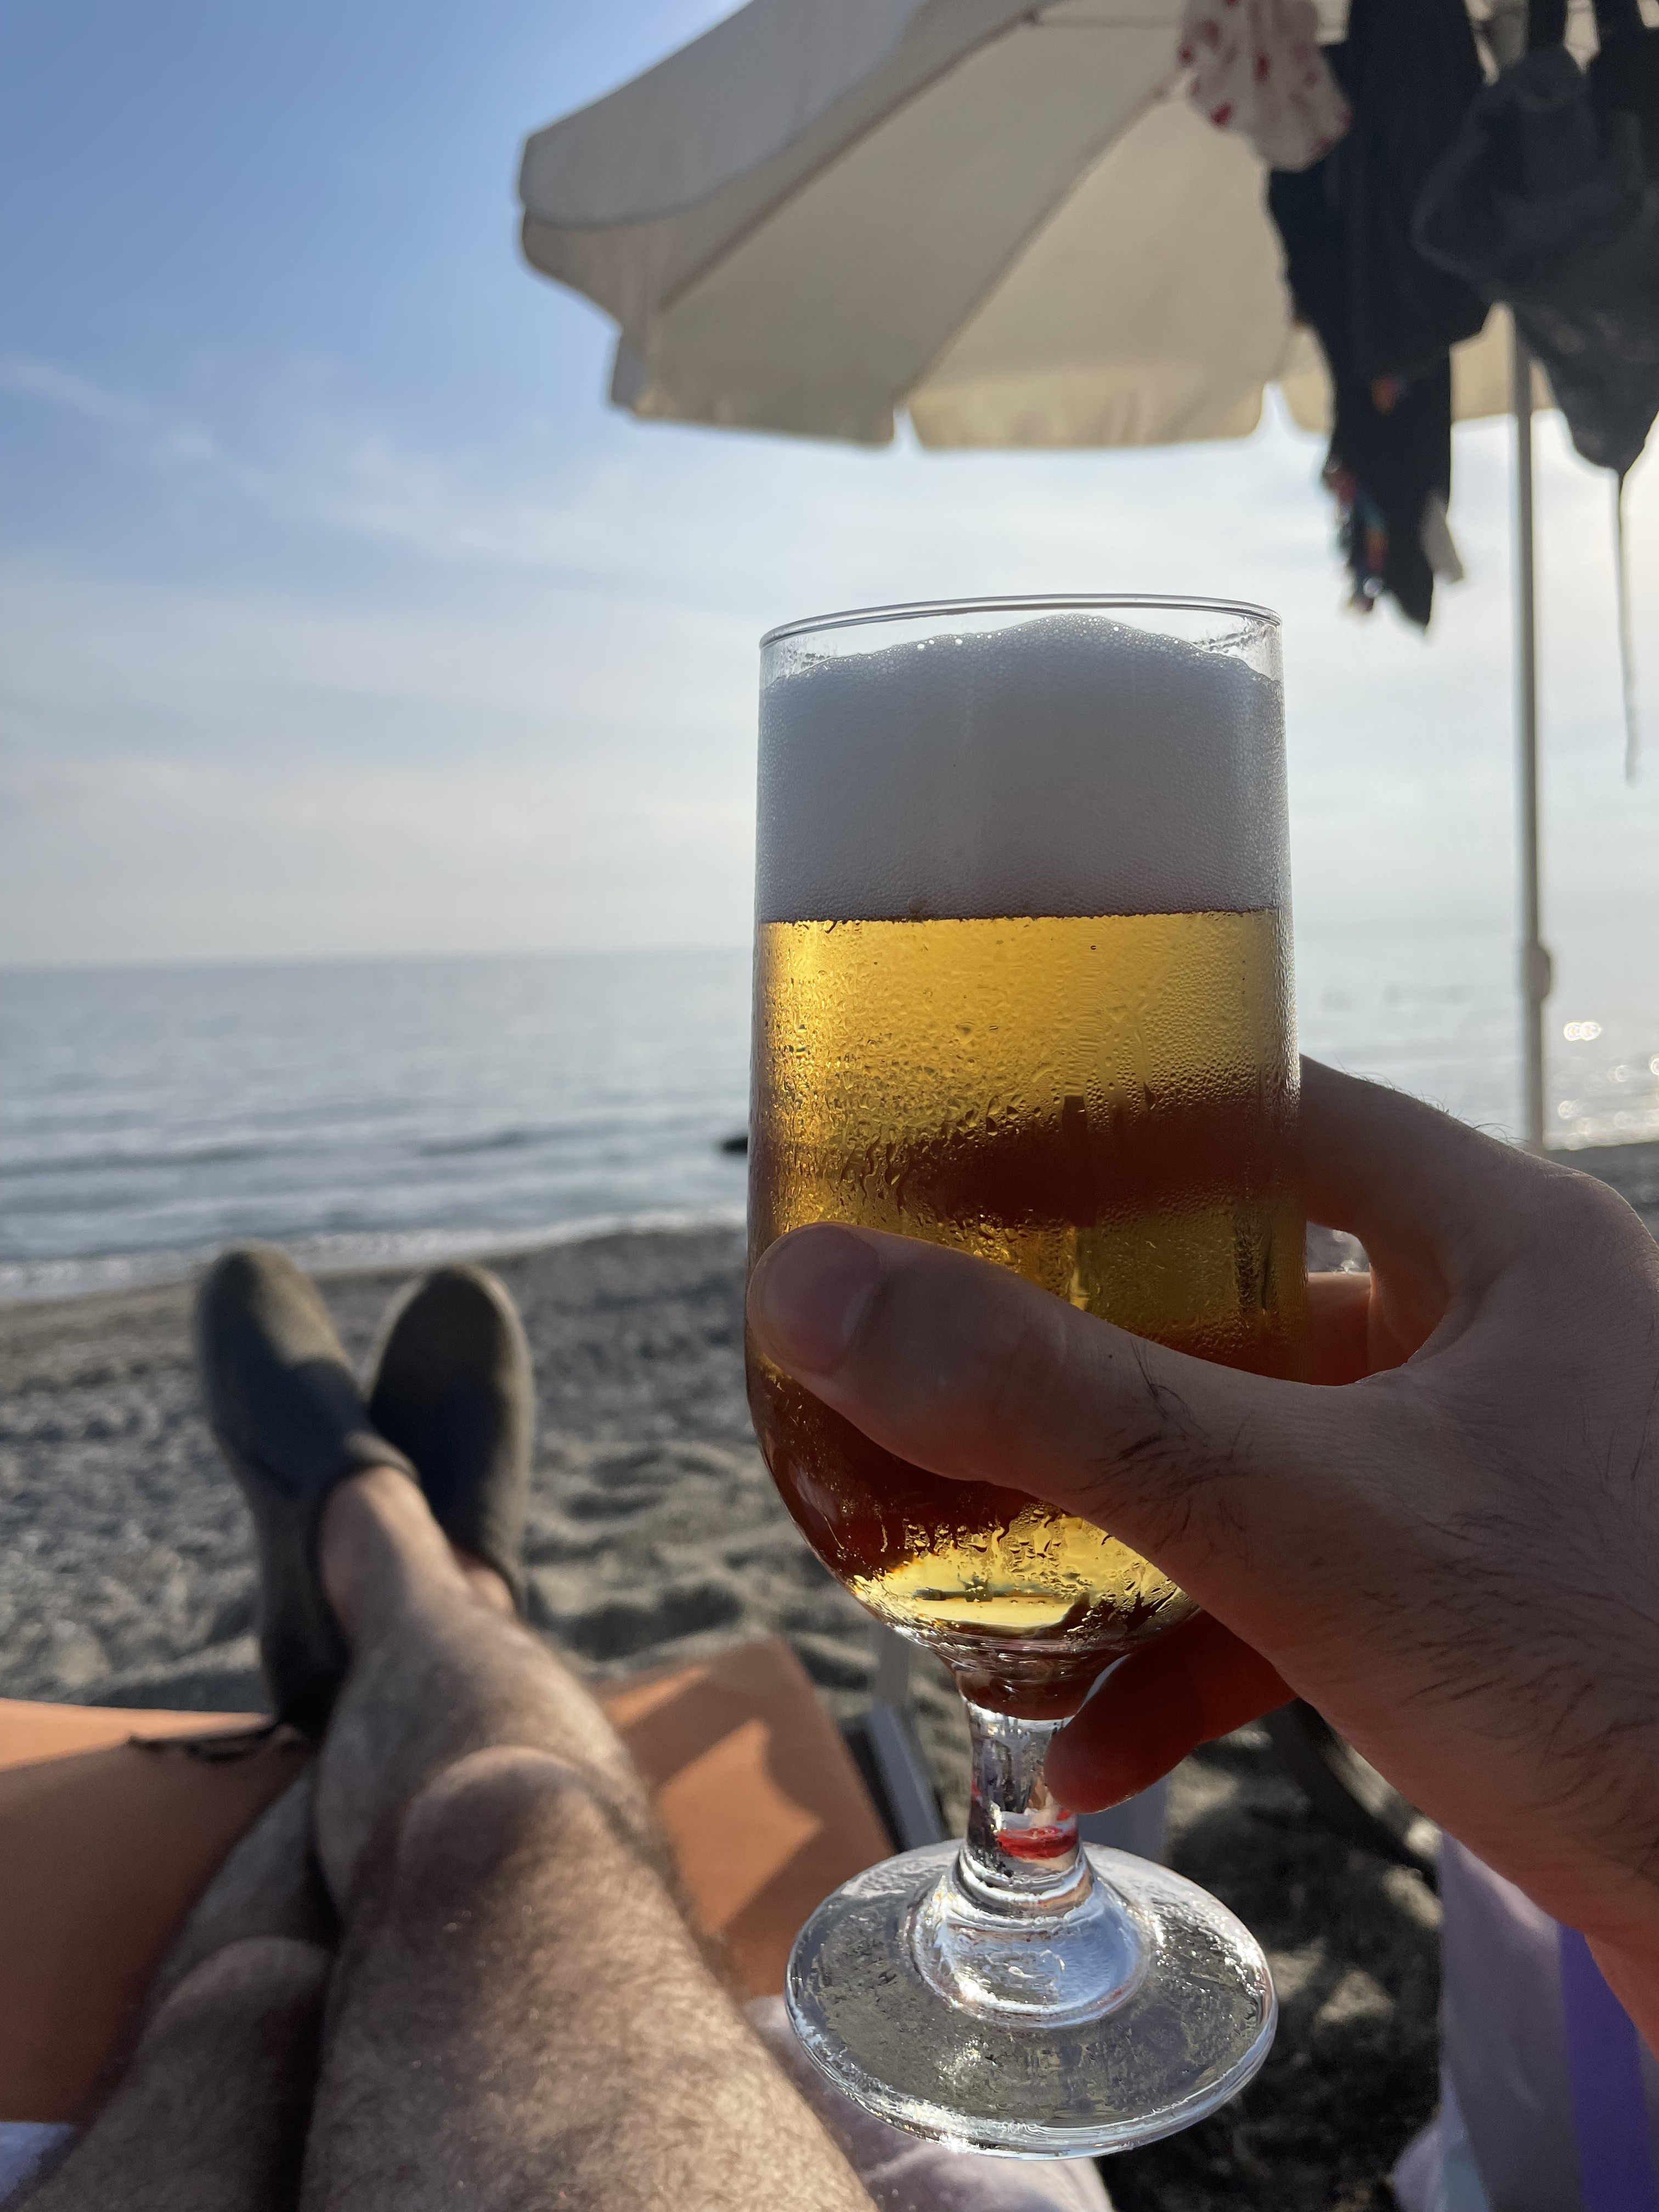 Holding a beer at the sea